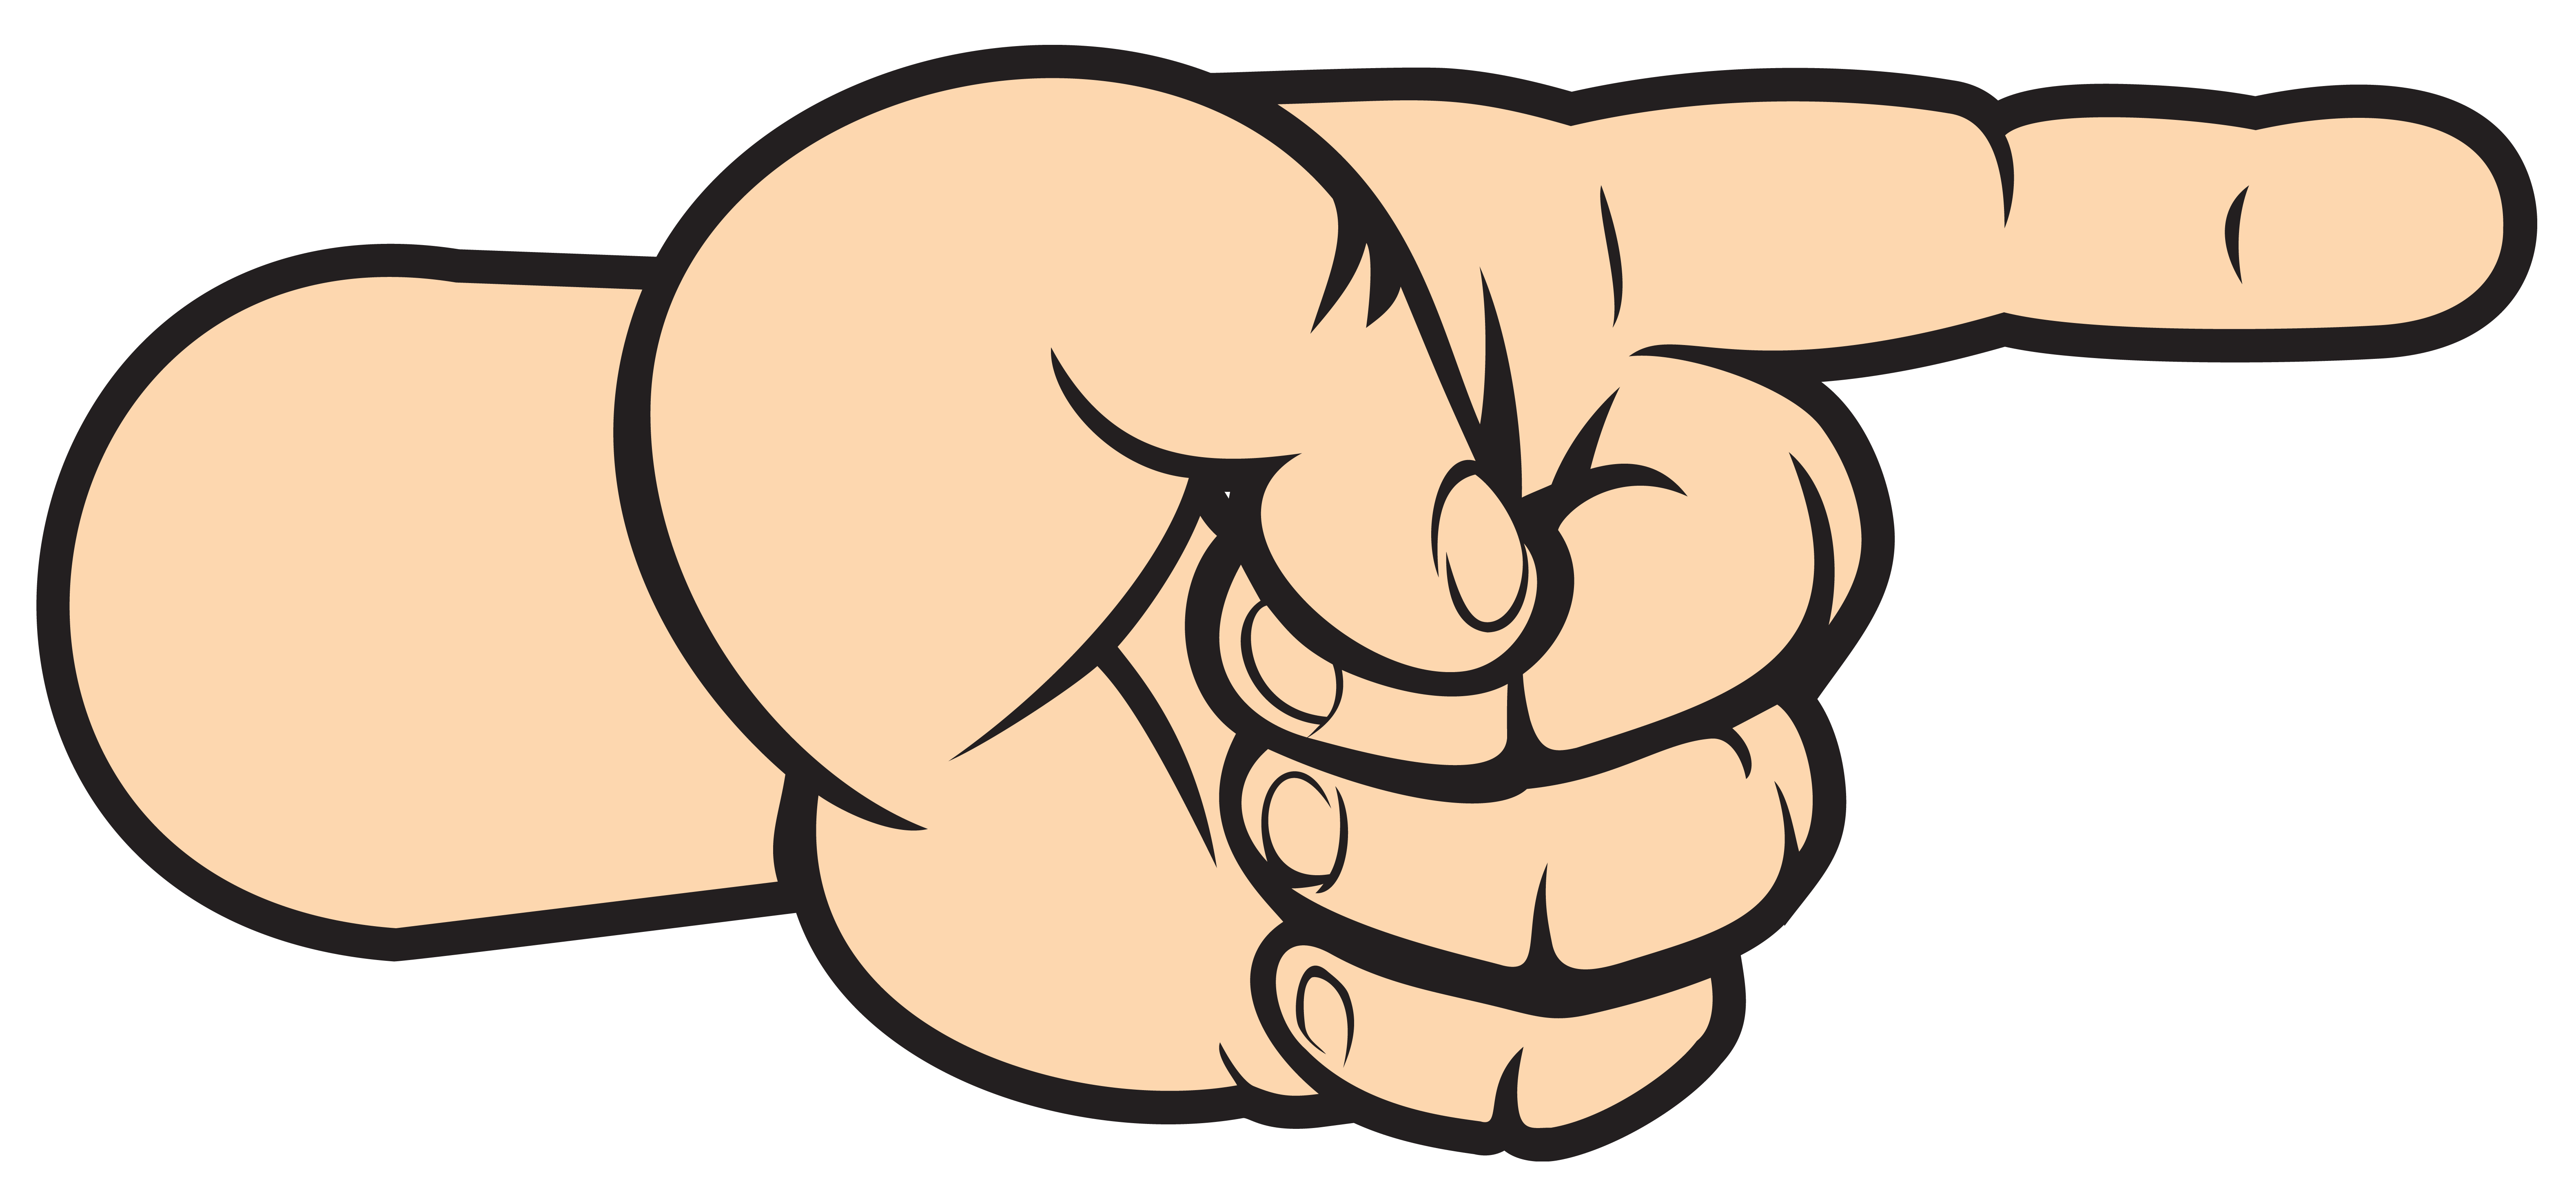 hand clipart png - photo #16